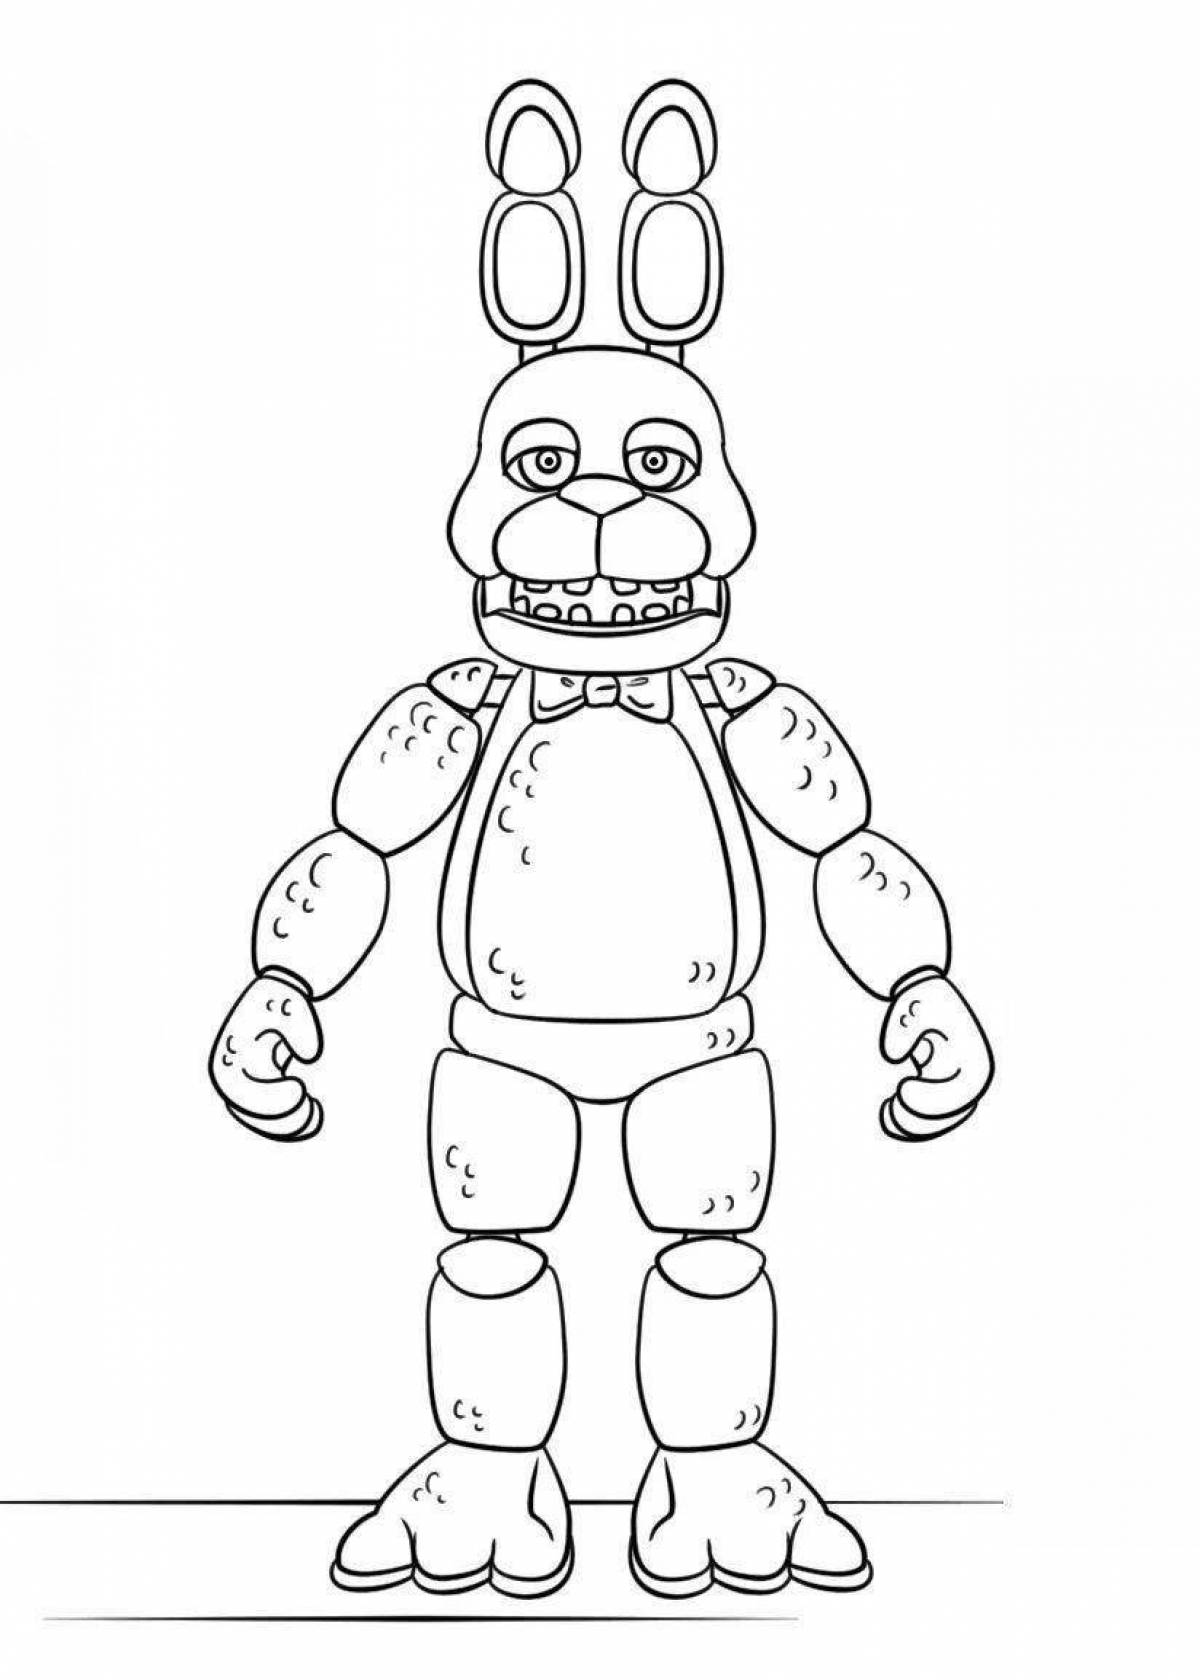 Welcome fnaf 3 coloring pages